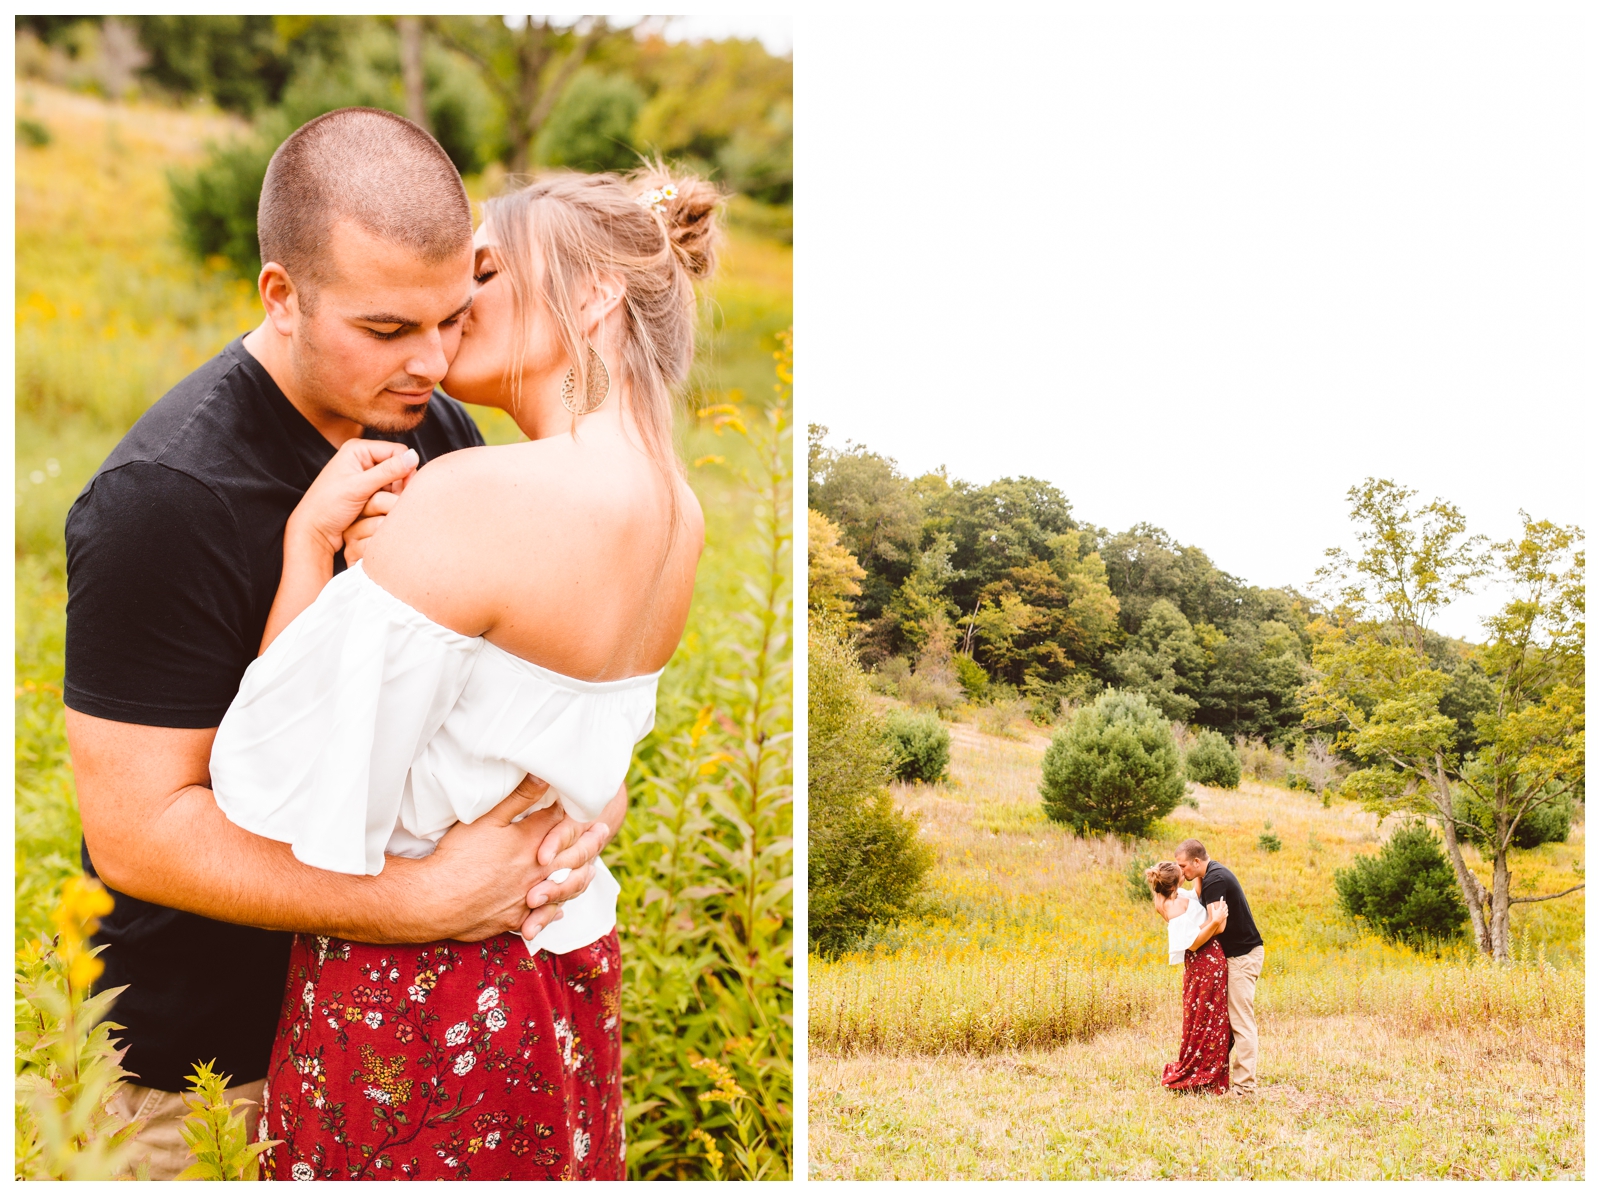 Savage River Lodge Yurt Lifestyle Honeymoon Session - Frostburg, Maryland Cozy In Home Couples Portraits - Brooke Michelle Photography